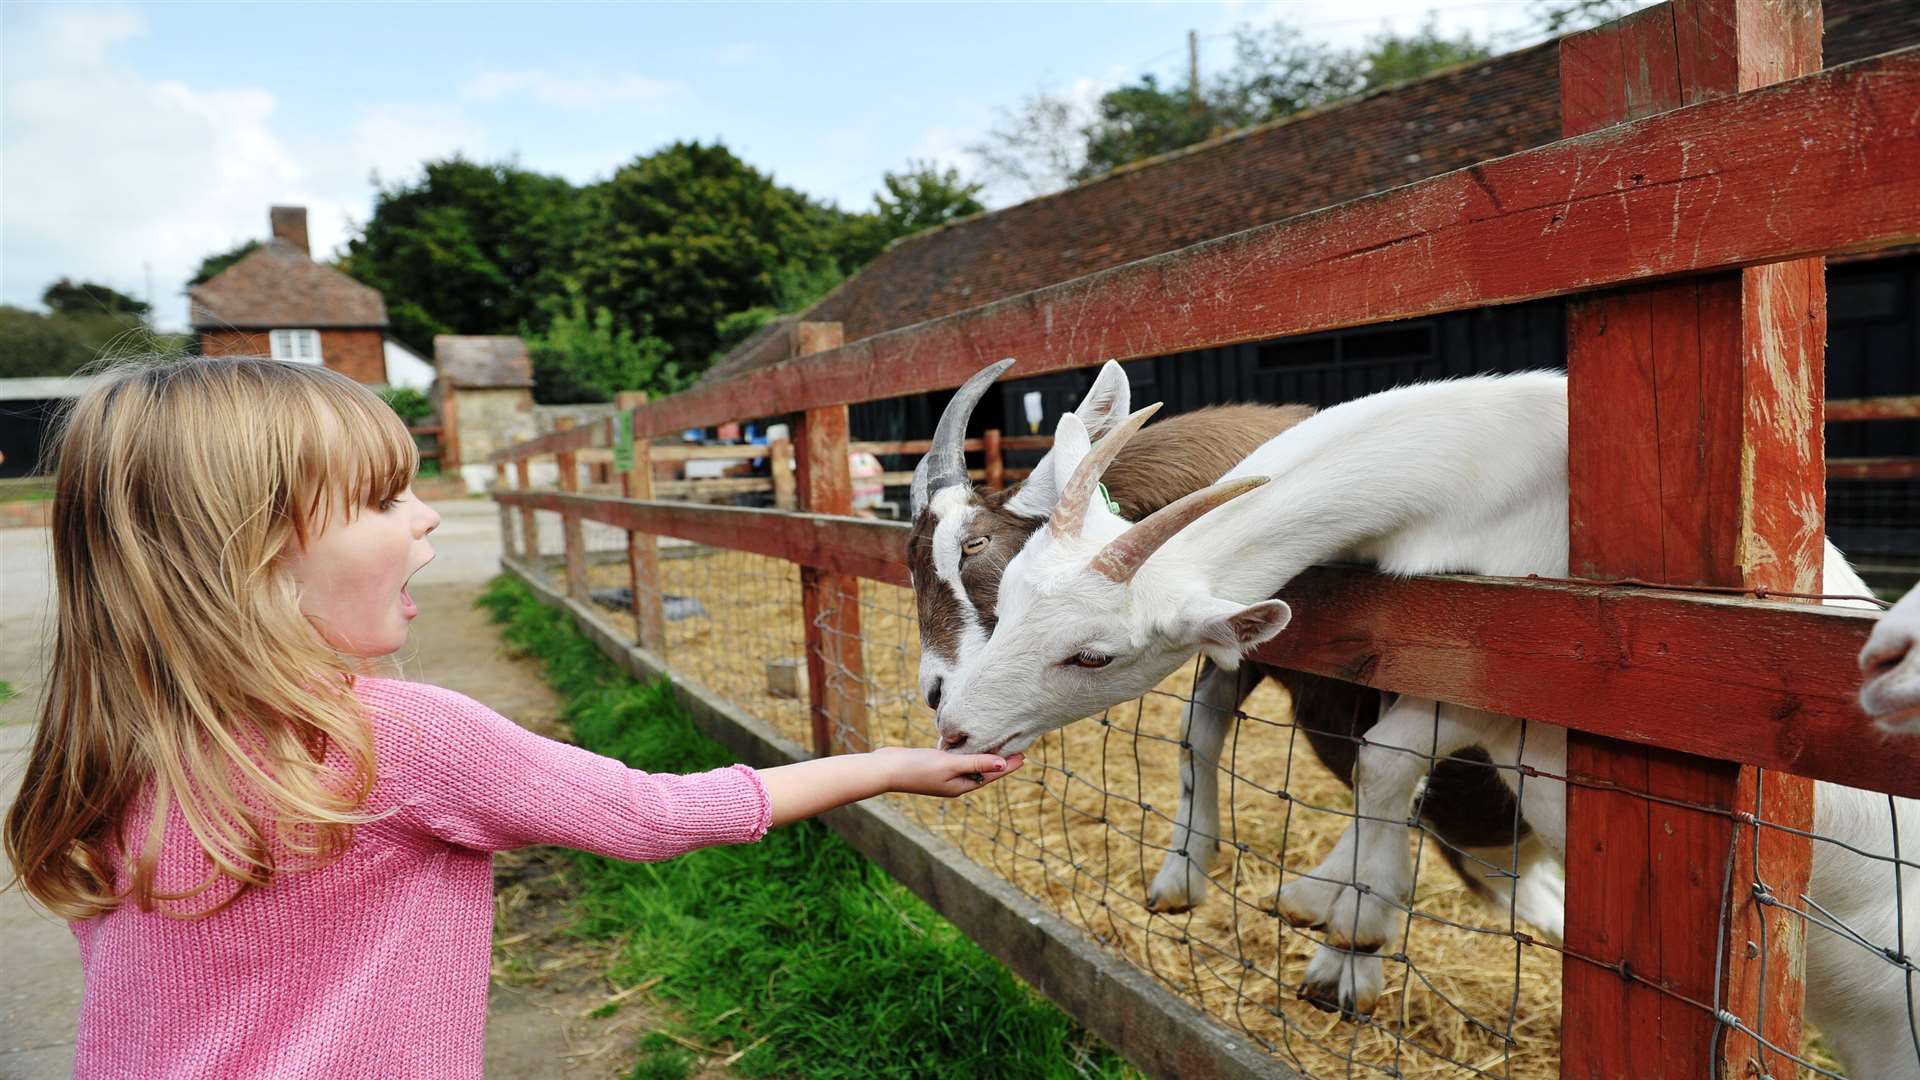 See the sheep and other animals at Kent Life